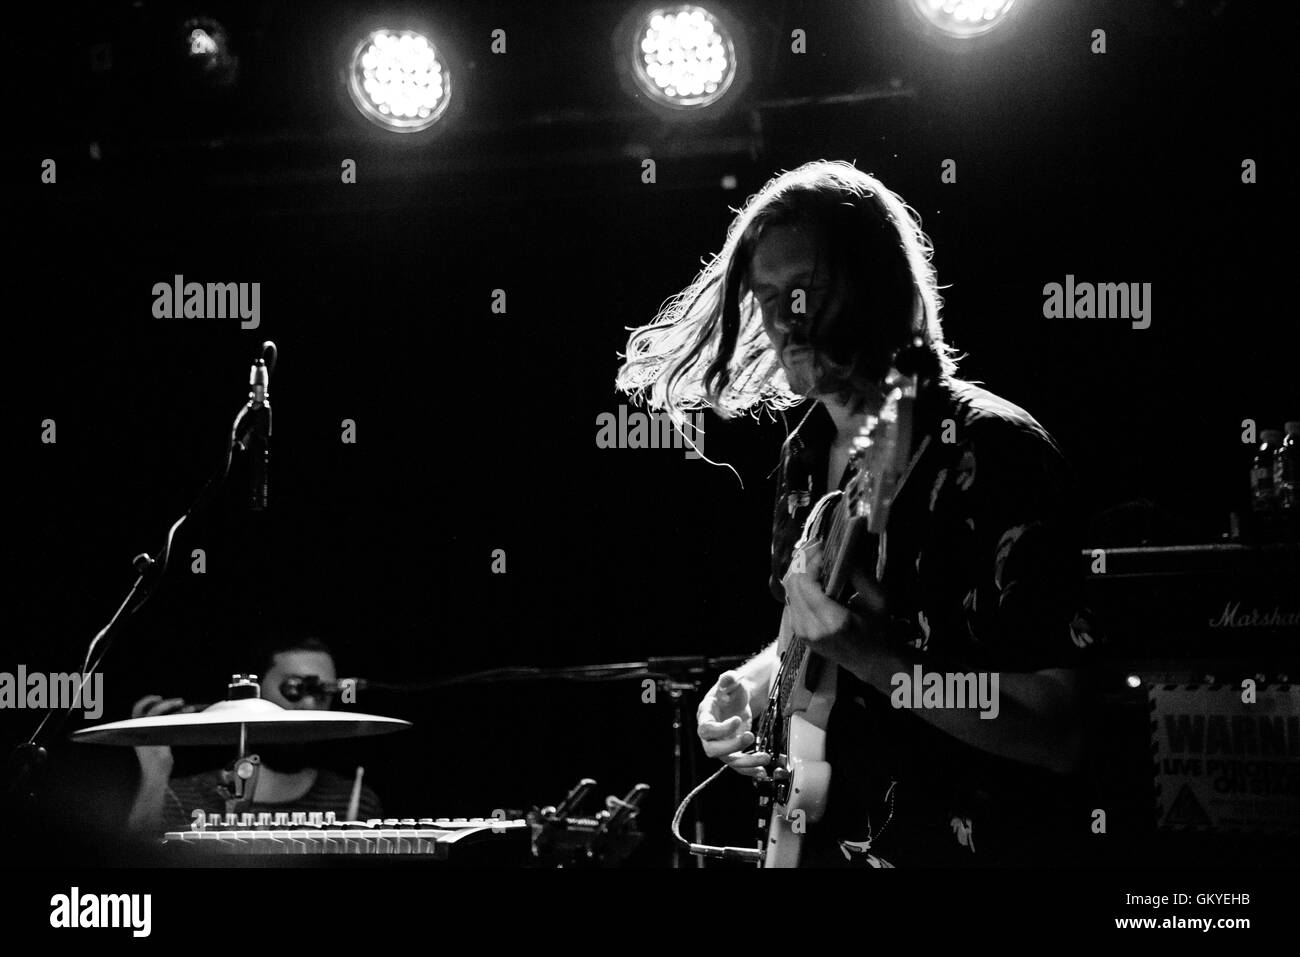 London UK. 24th August 2016. Australian band The Temper Trap perform at The Lexington for the first time after seven years. Credit: Alberto Pezzali/Alamy Live News. Stock Photo